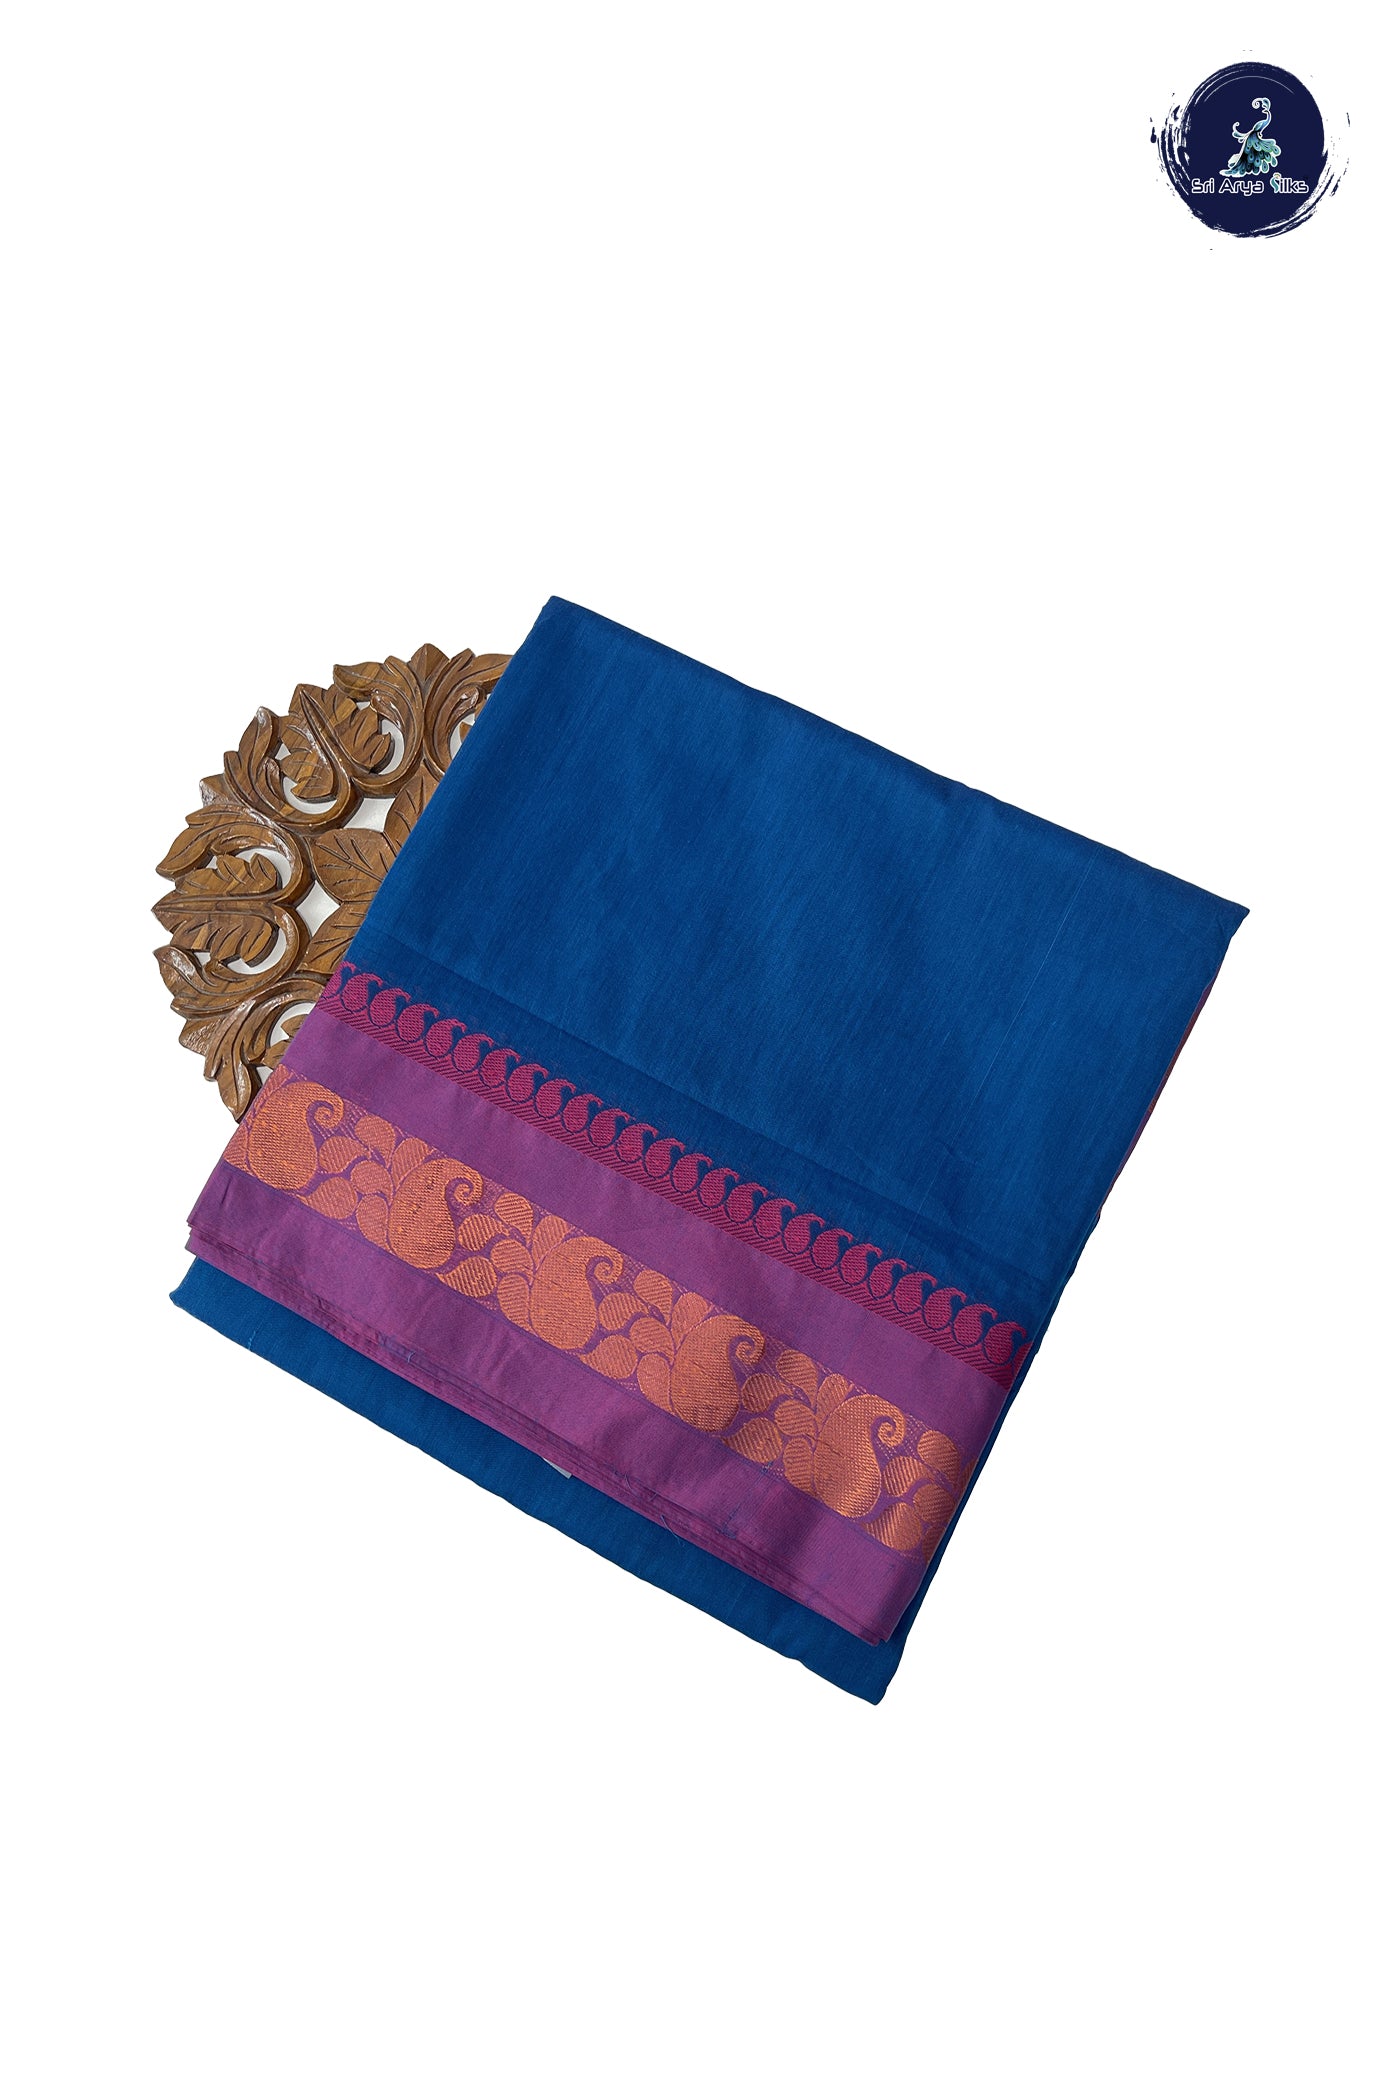 Copper Sulphate Blue Madisar Cotton Saree With Plain Pattern